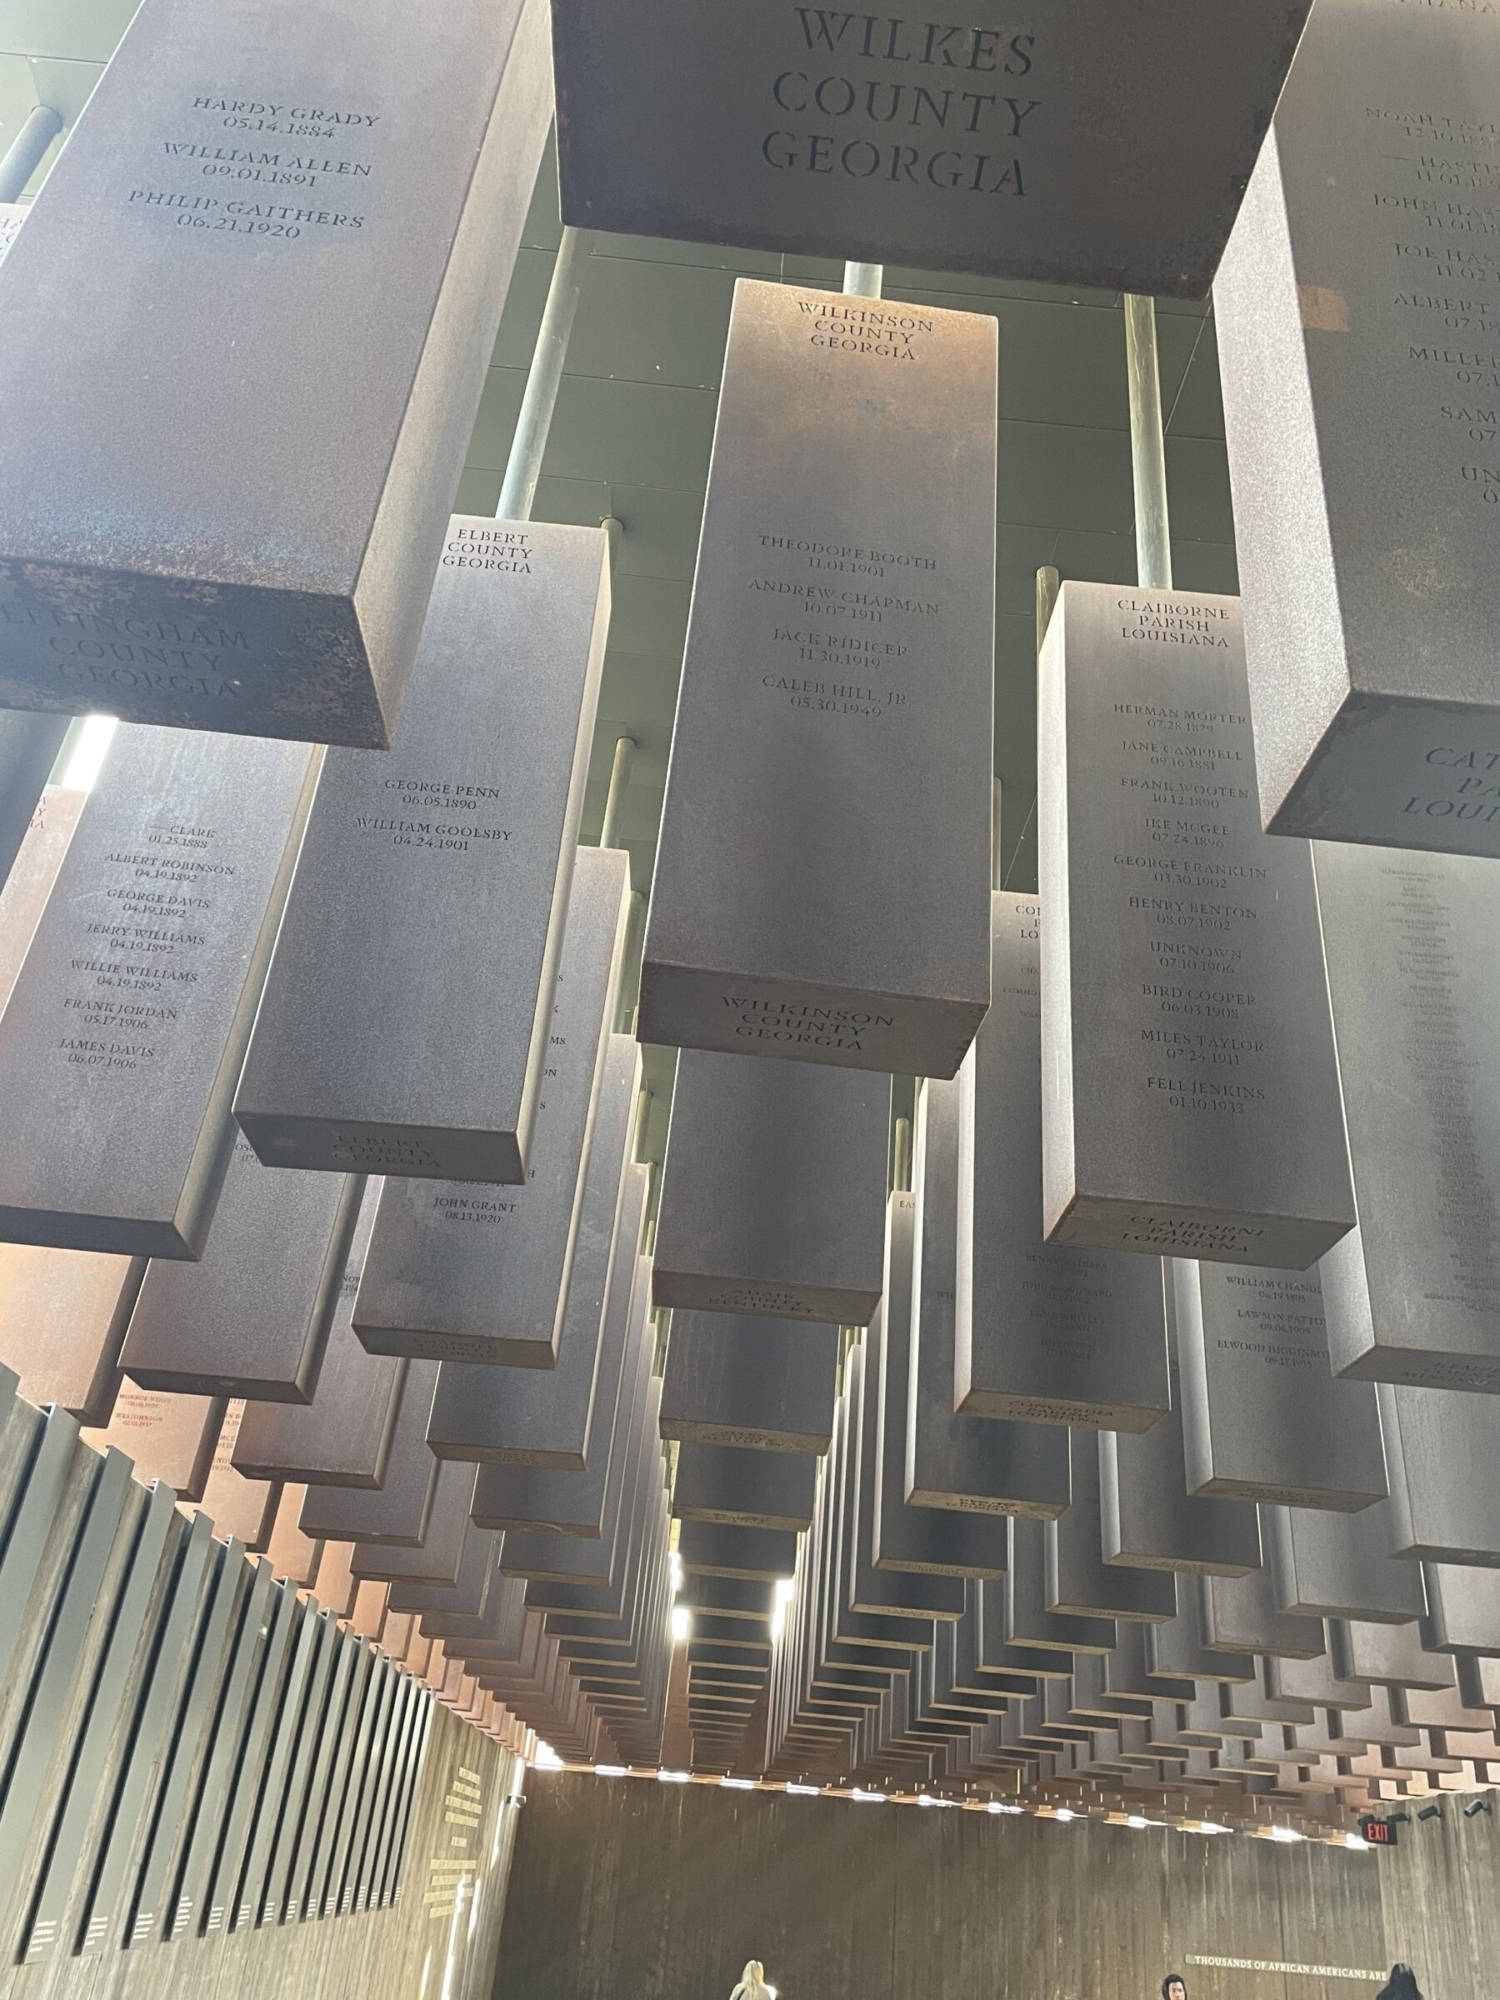 Large silver rectangle blocks hang from the ceiling in the National Memorial for Peace and Justice, with names of lynching victims memorialized on them.